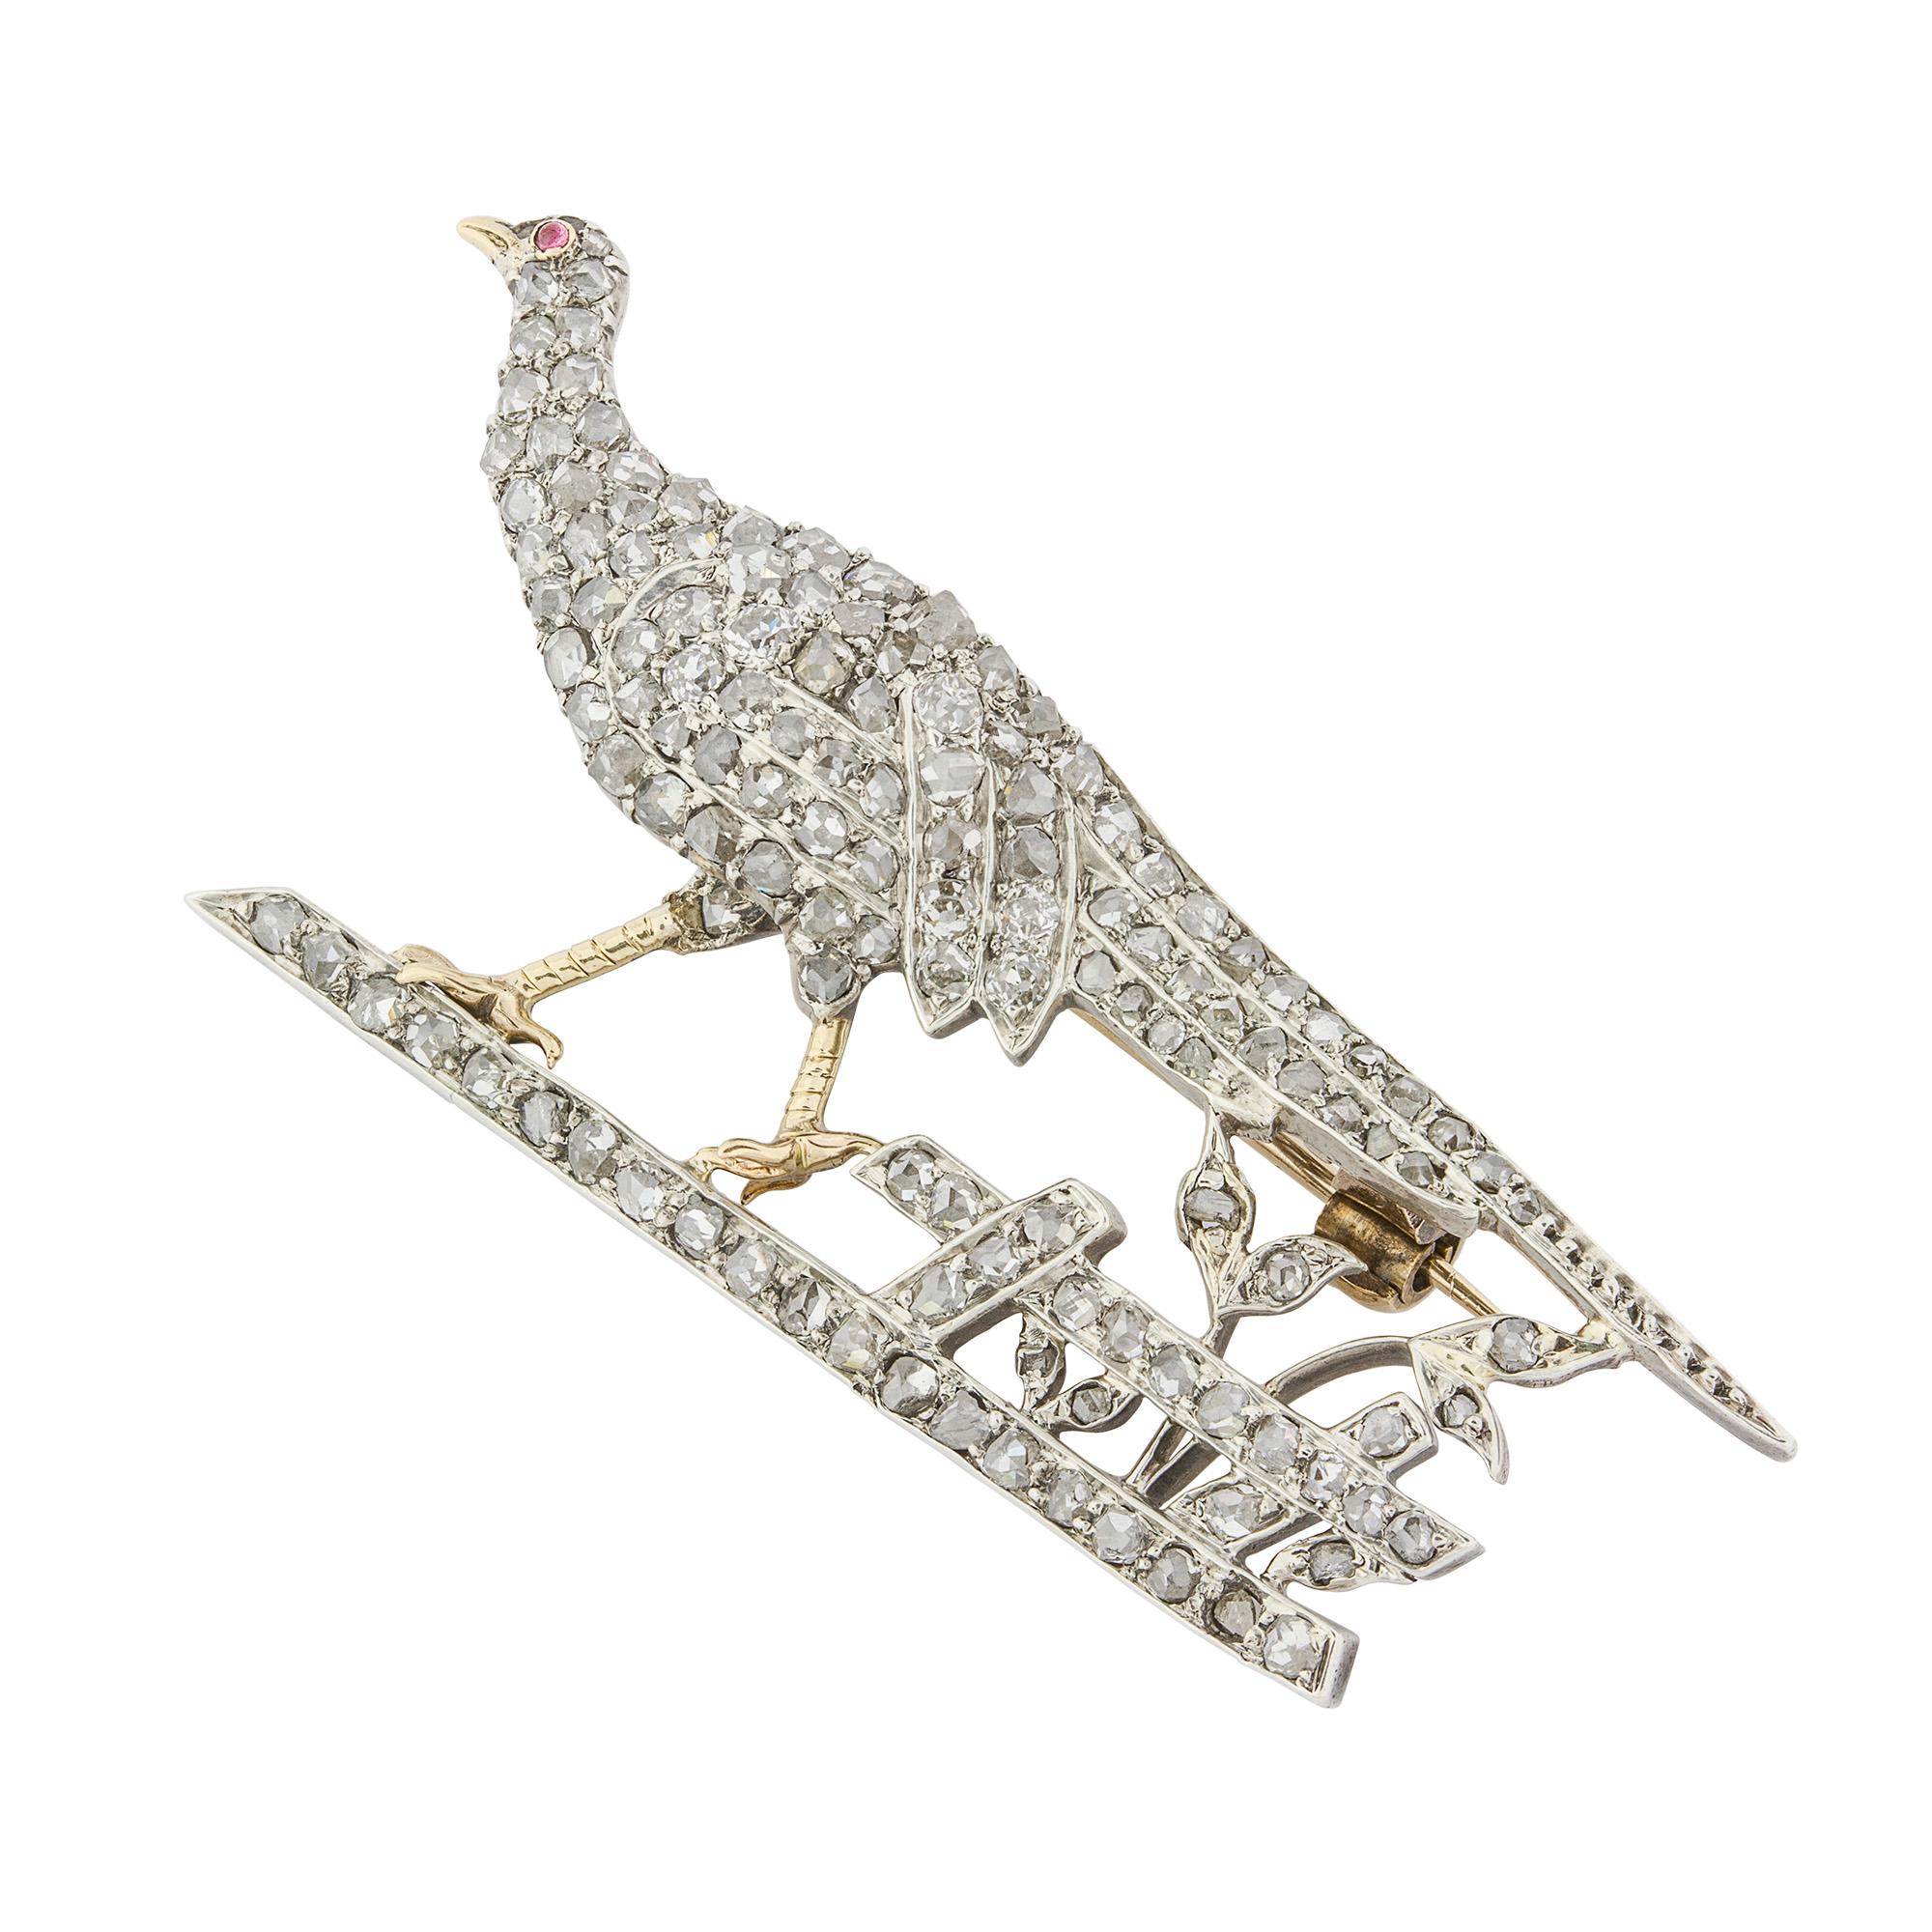 A Victorian diamond set pheasant brooch, pave set with rose diamond with a cabochon ruby eye, standing on a base with fence and foliate detail, the diamonds set in silver and mounted on yellow gold, circa 1880, measuring 4.9 x 2cm, gross weight 5.4